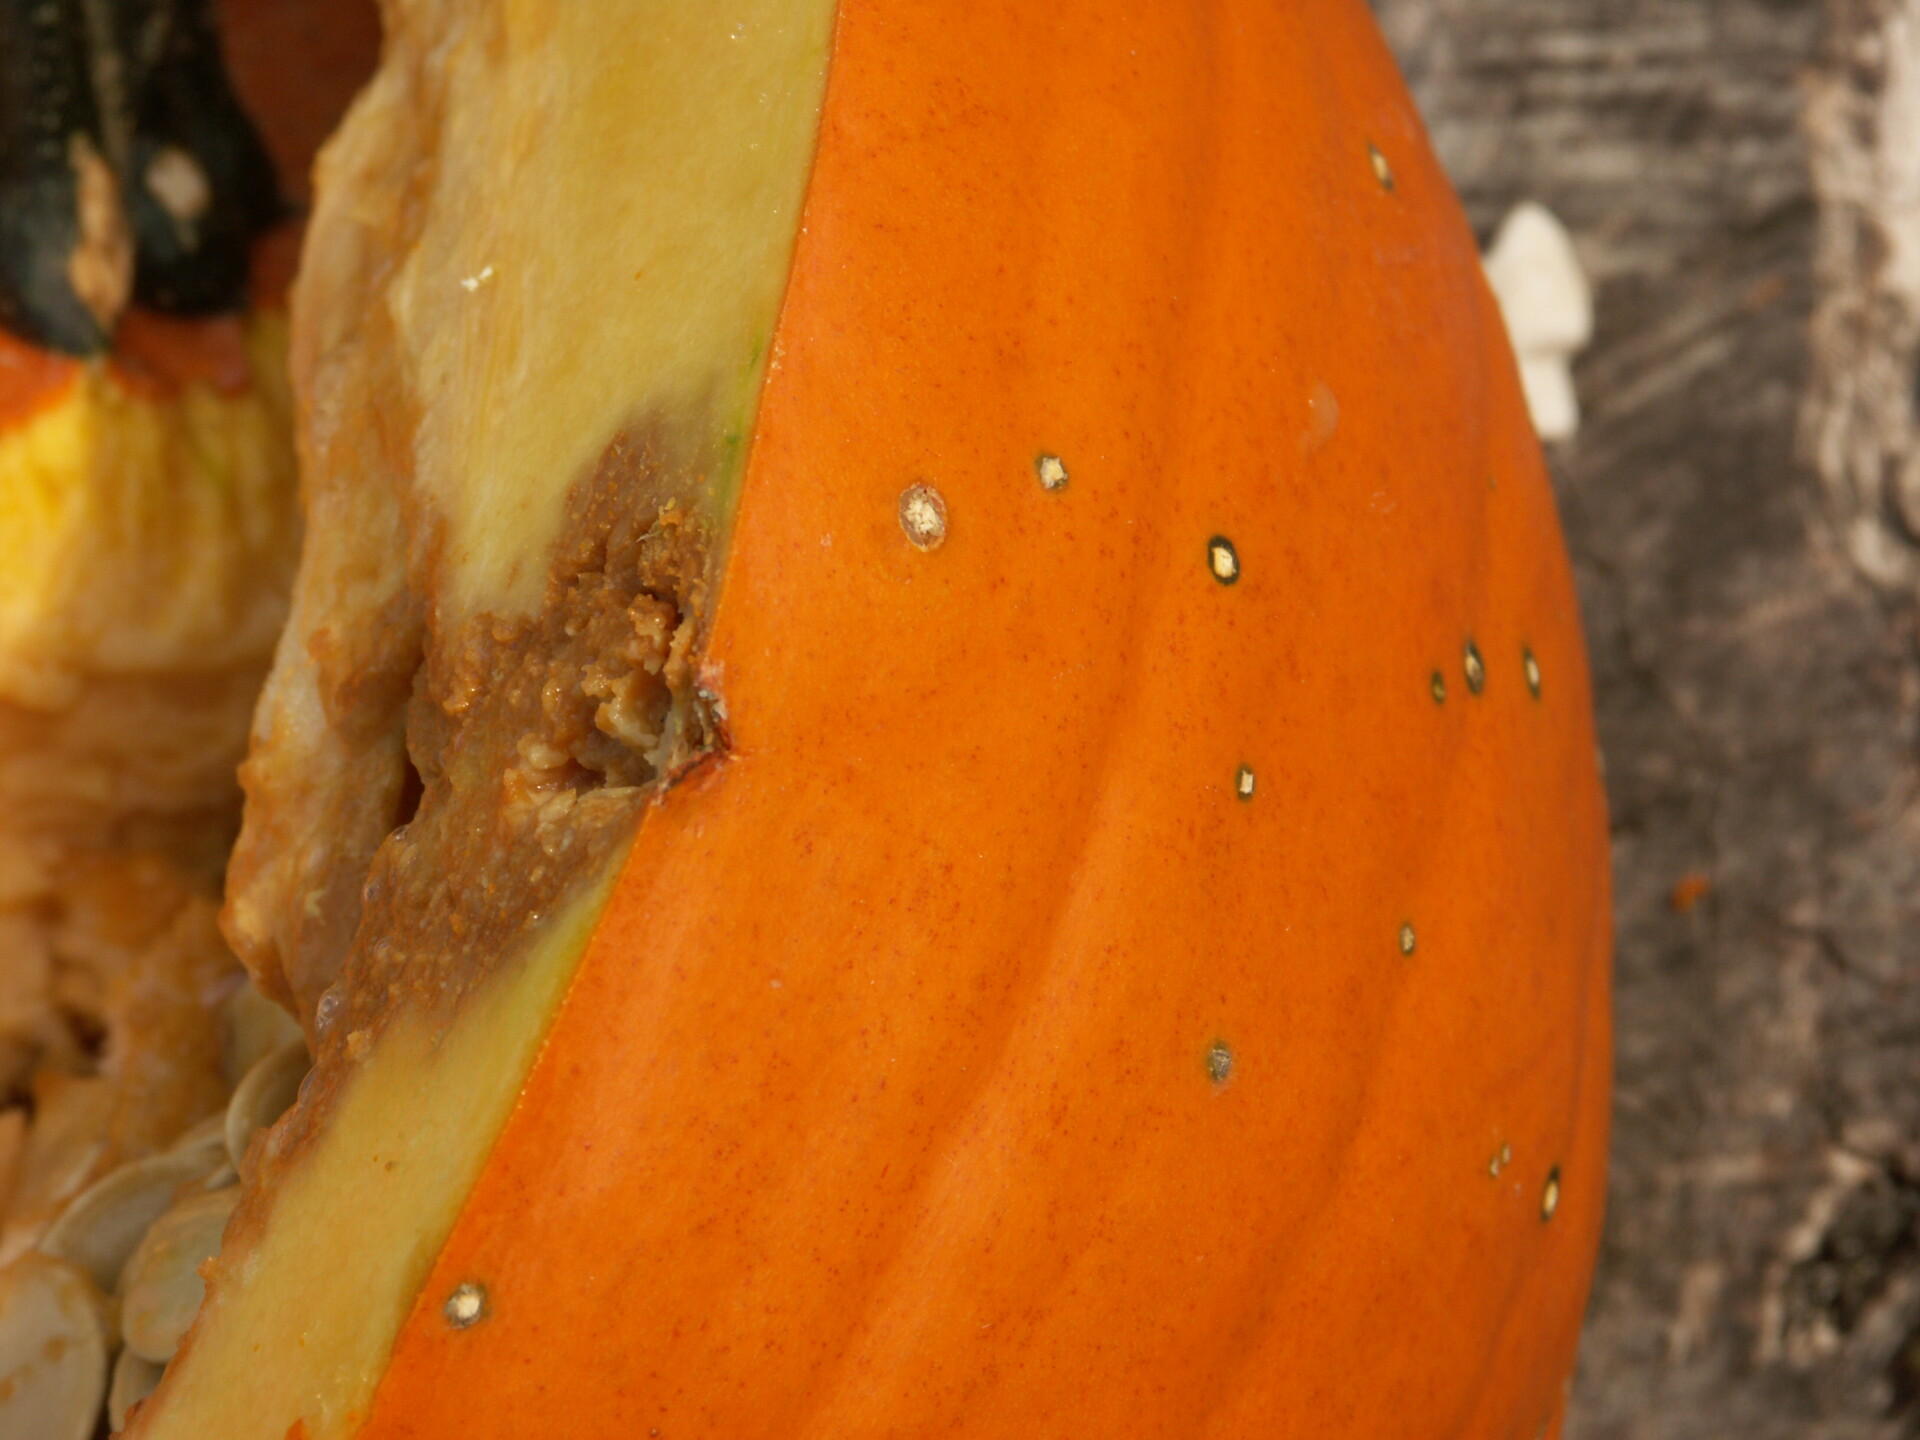 Figure 9. Typical lesions of bacterial spot can be observed on this pumpkin along with one that has been infected by secondary fungi causing it to rot through the pumpkin rind.